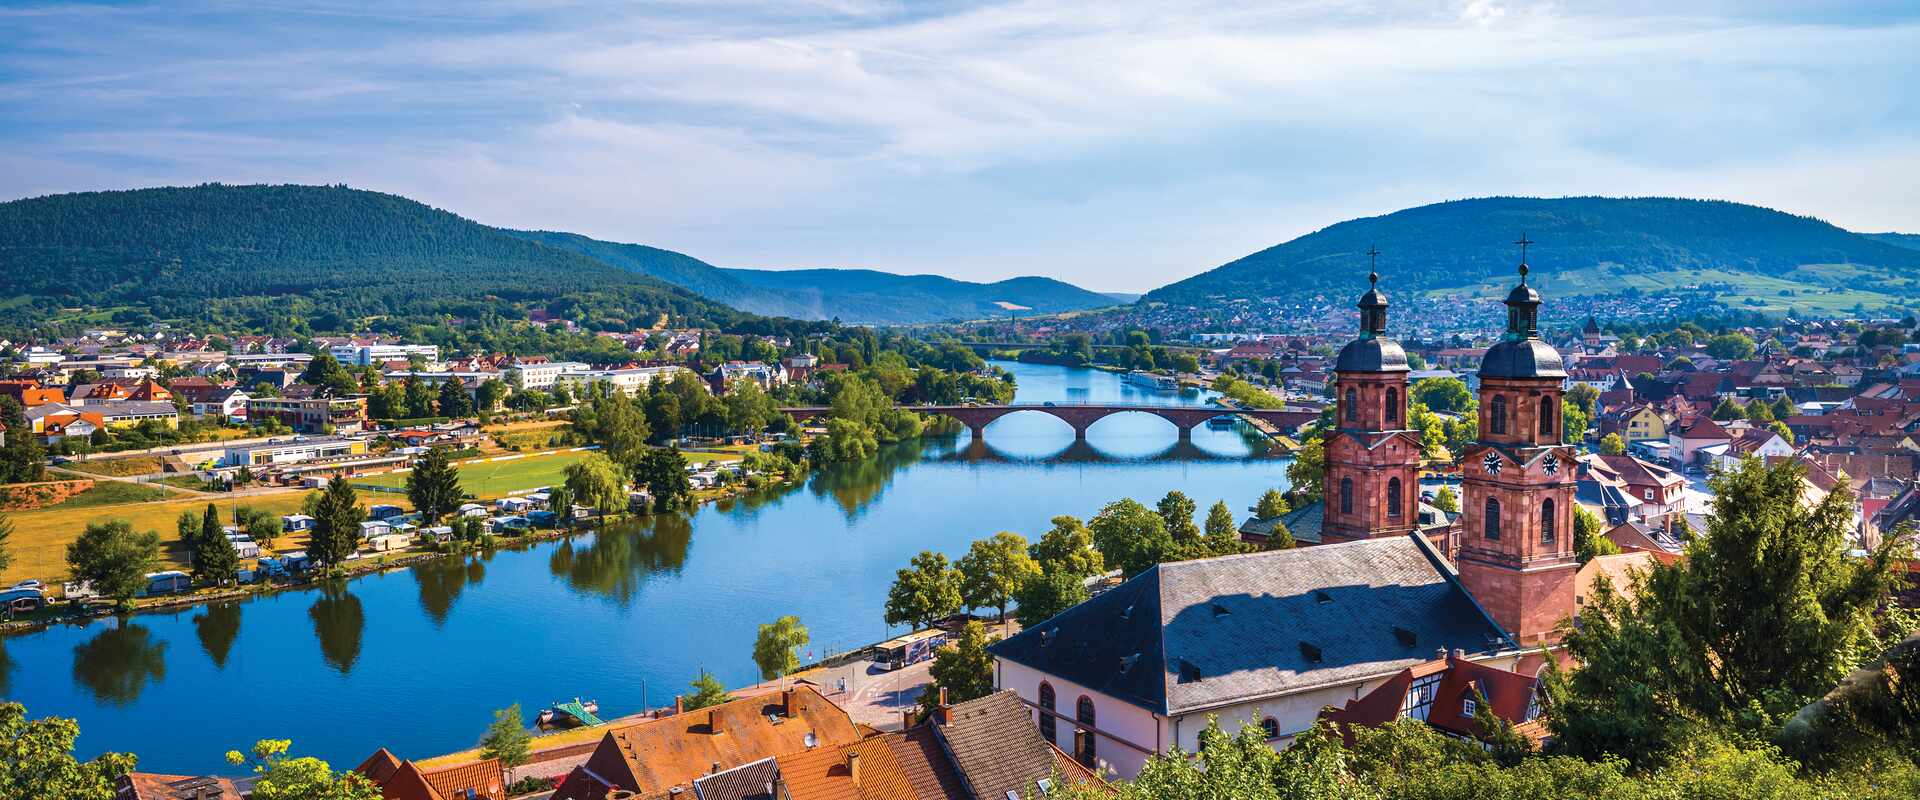 View of Miltenberg on the Main River in Germany